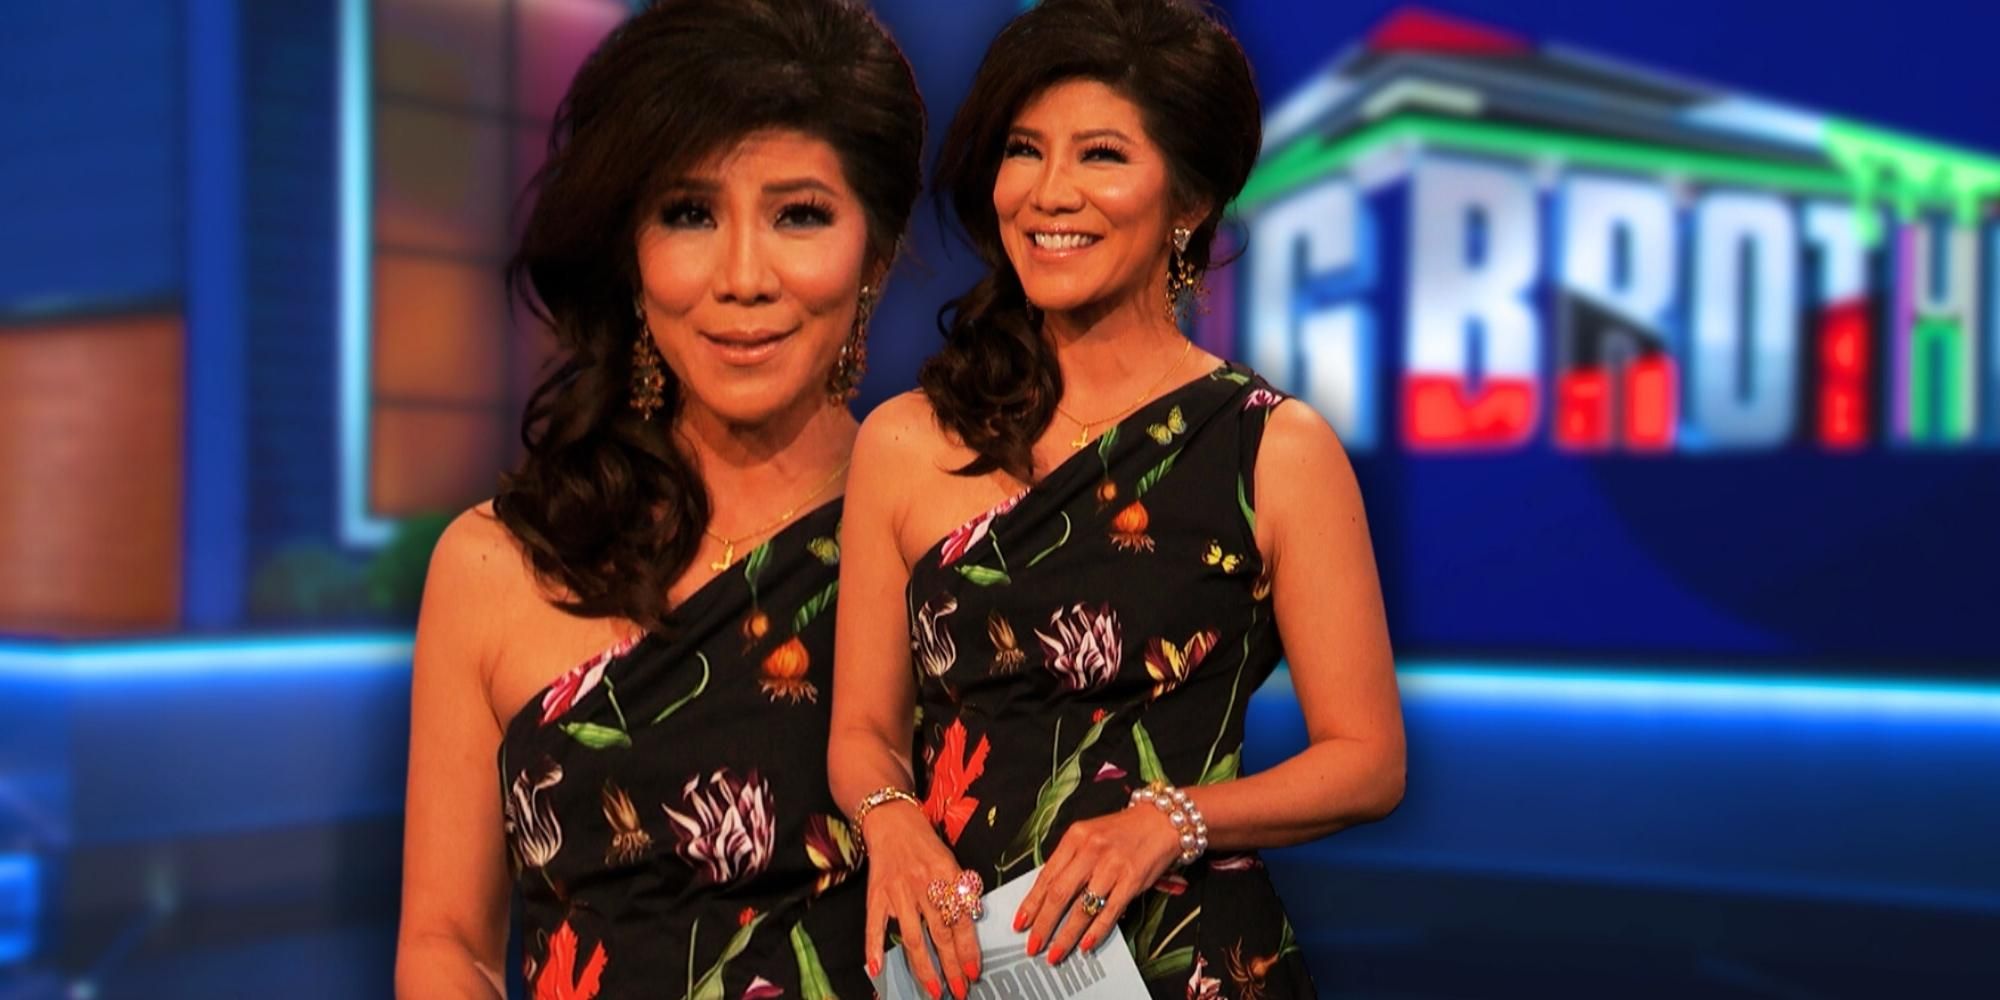 Montage of Big Brother host Julie Chen Moonves